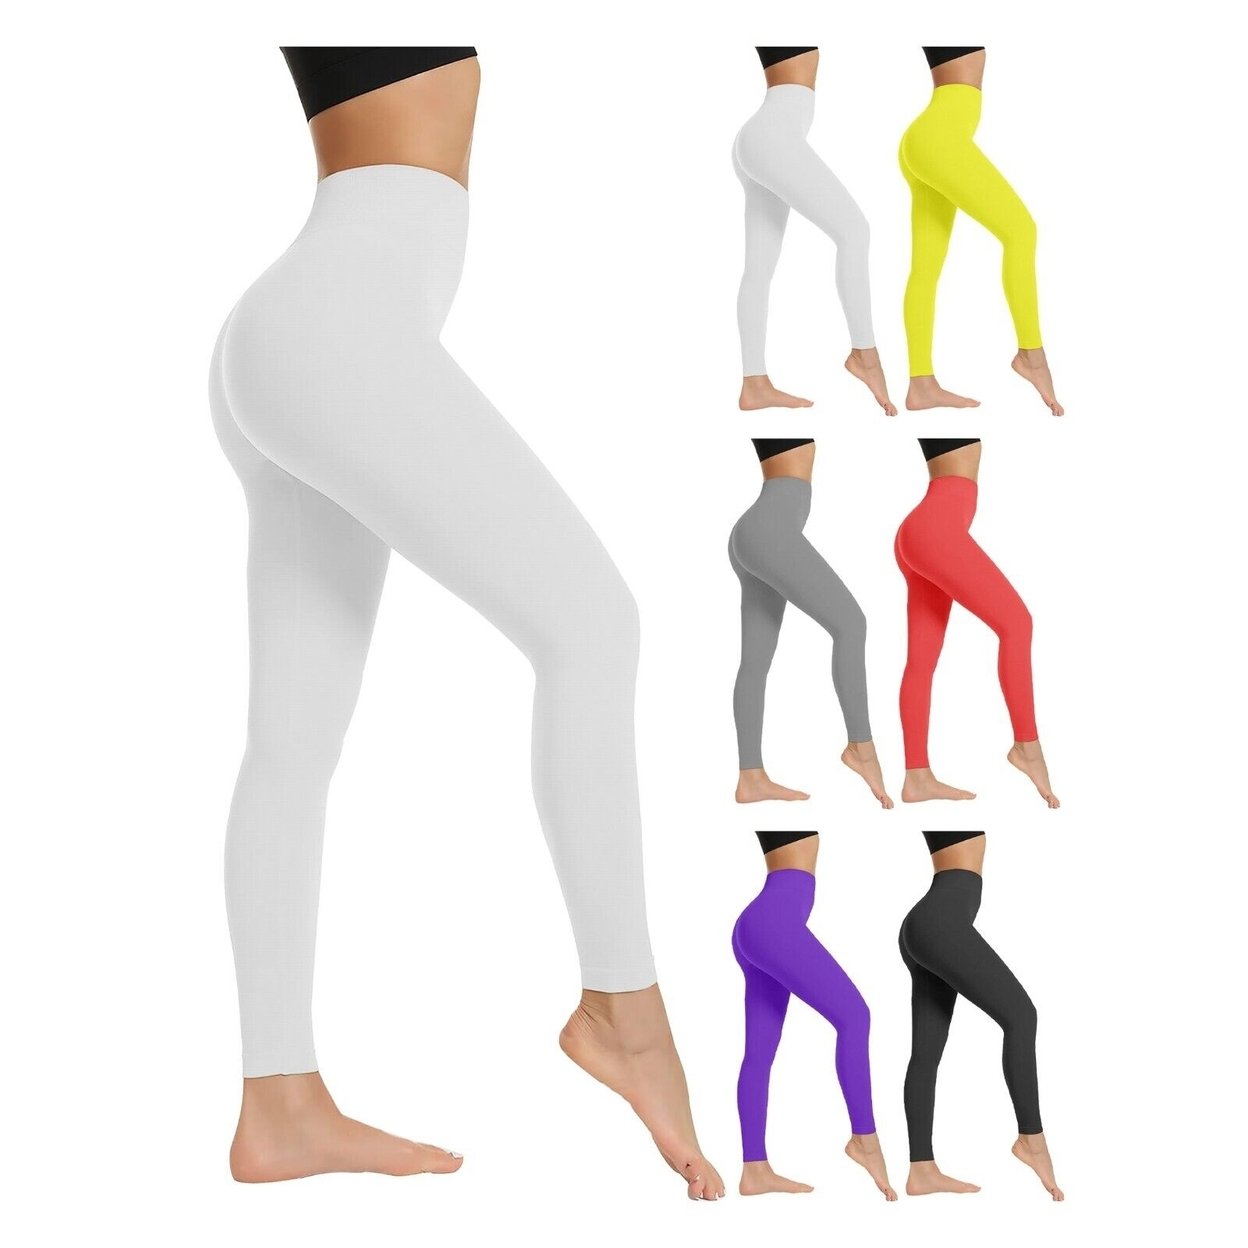 2-Pack: Women's High Waist Super Soft Active Athlete Stretch Yoga Cozy Leggings - Yellow & Red, Small